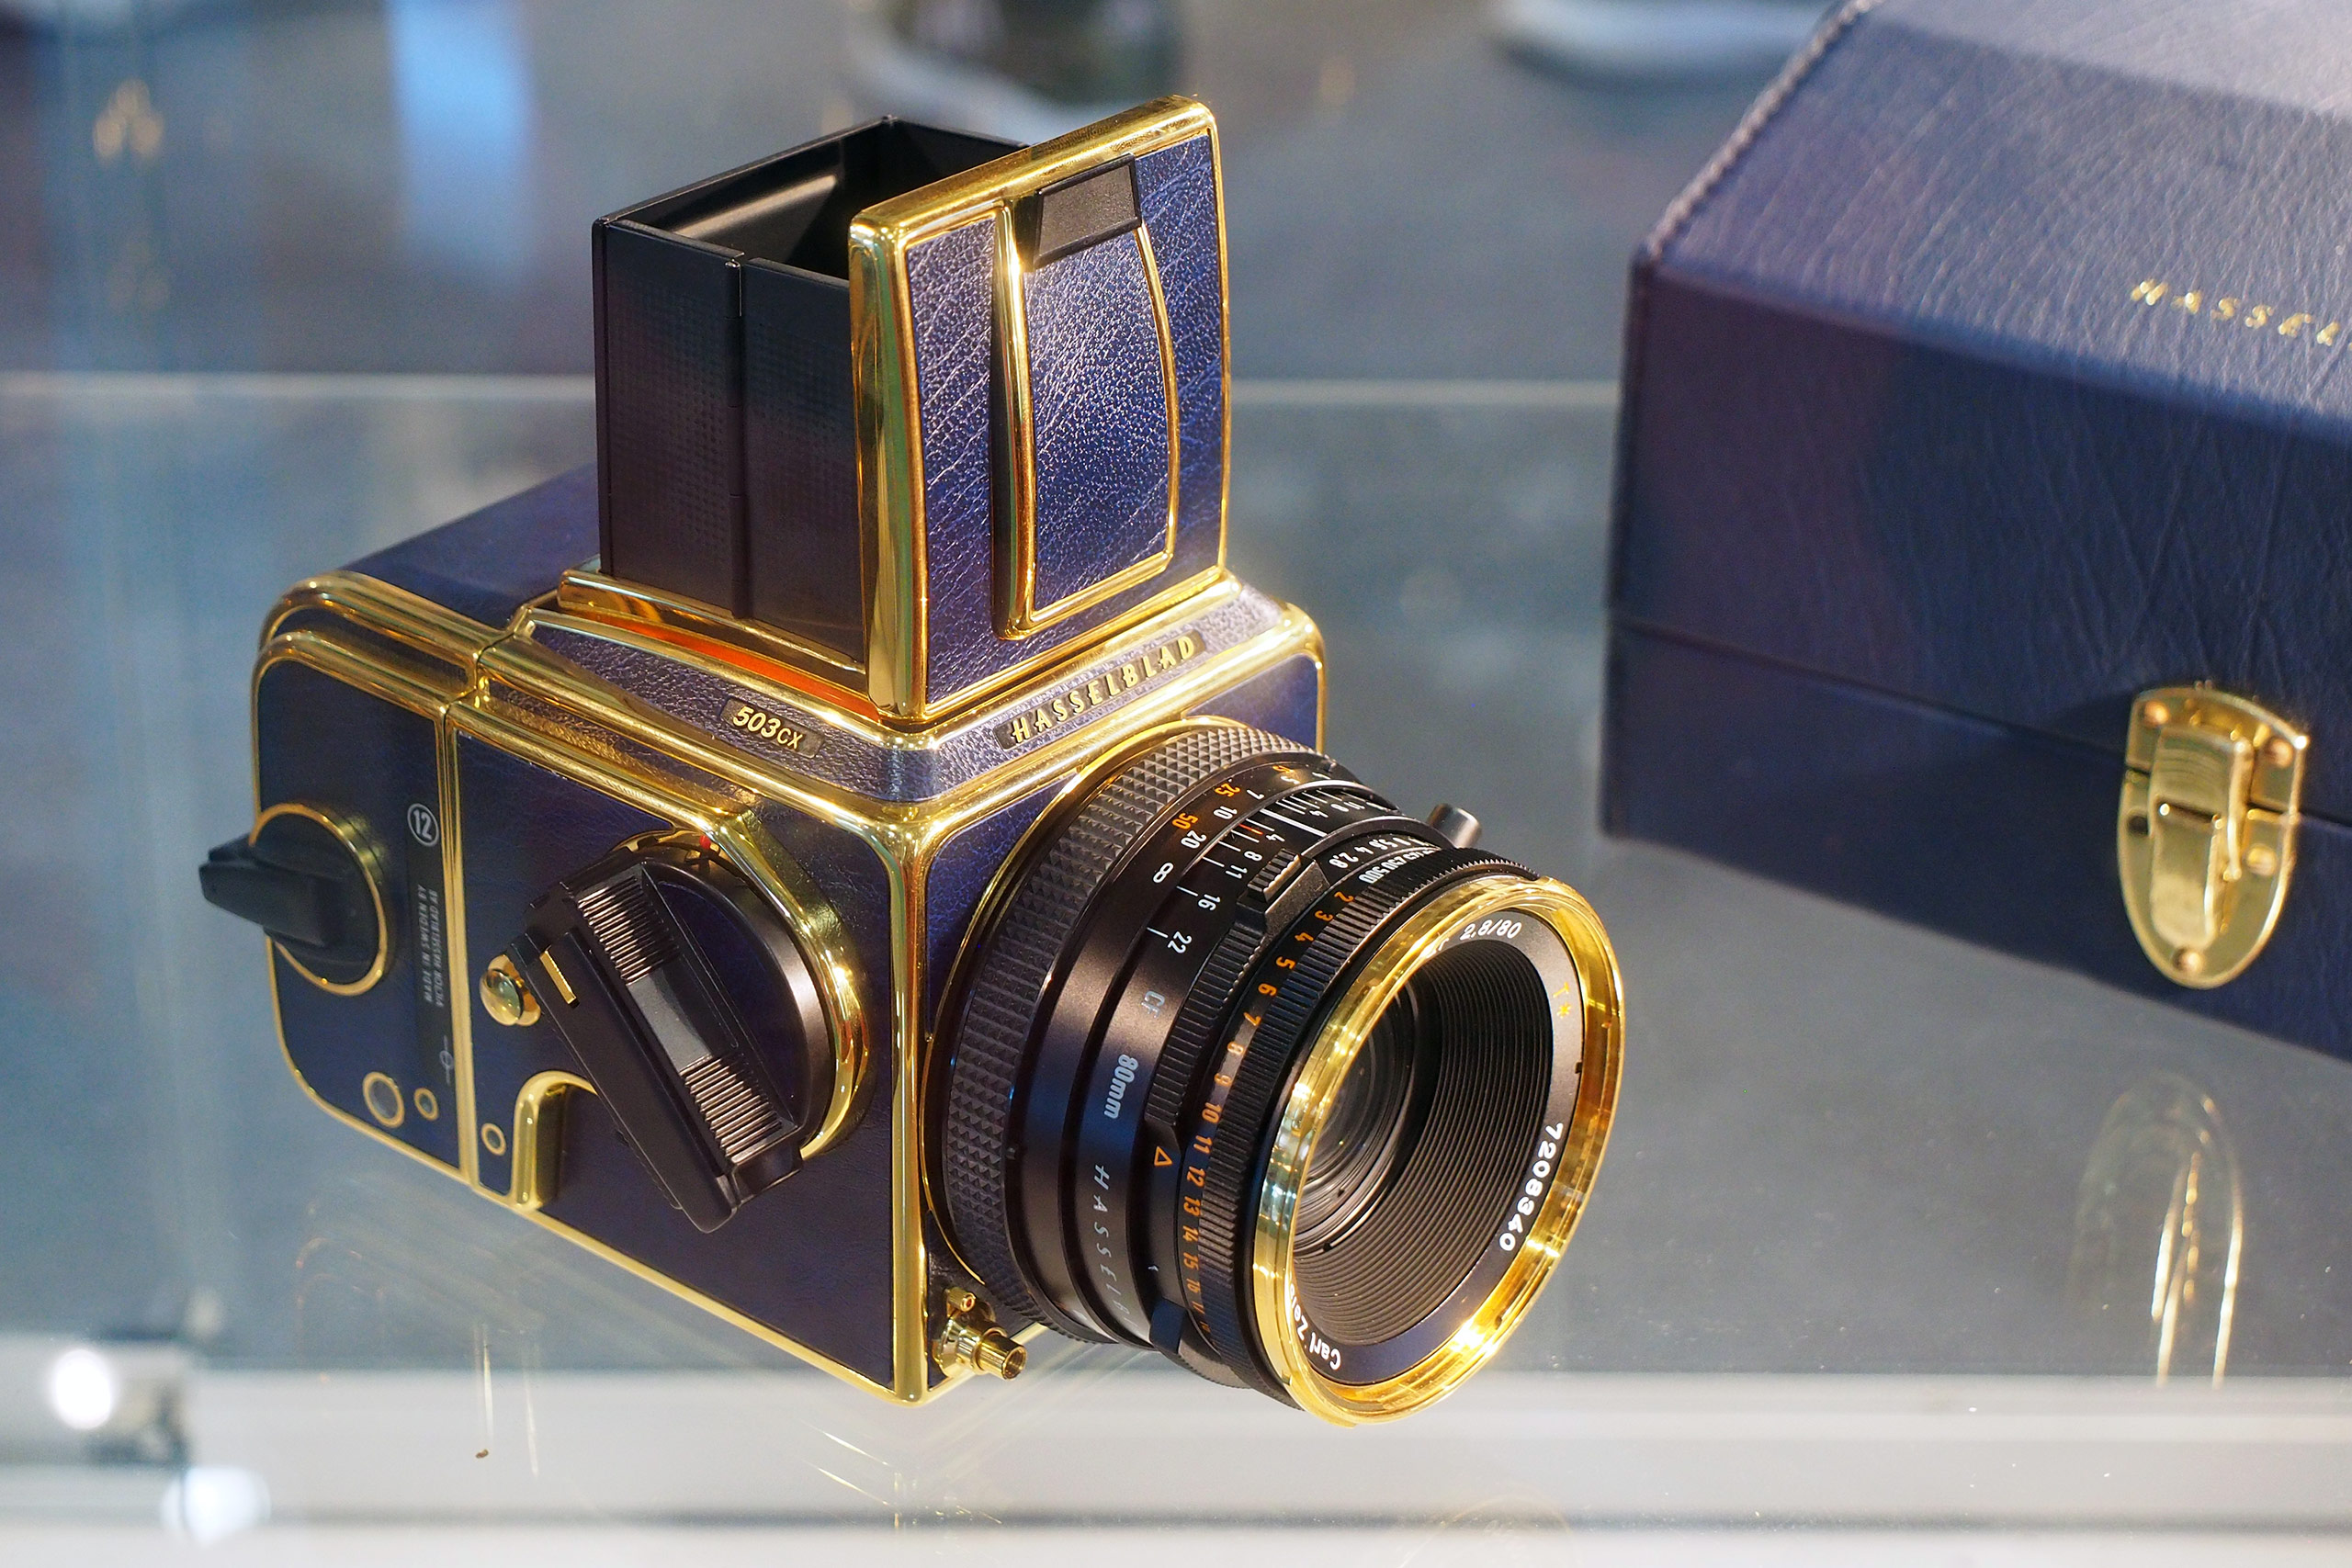 The gold Hasselblad 503cx, as shown by Flints Auctions at TPS 2022